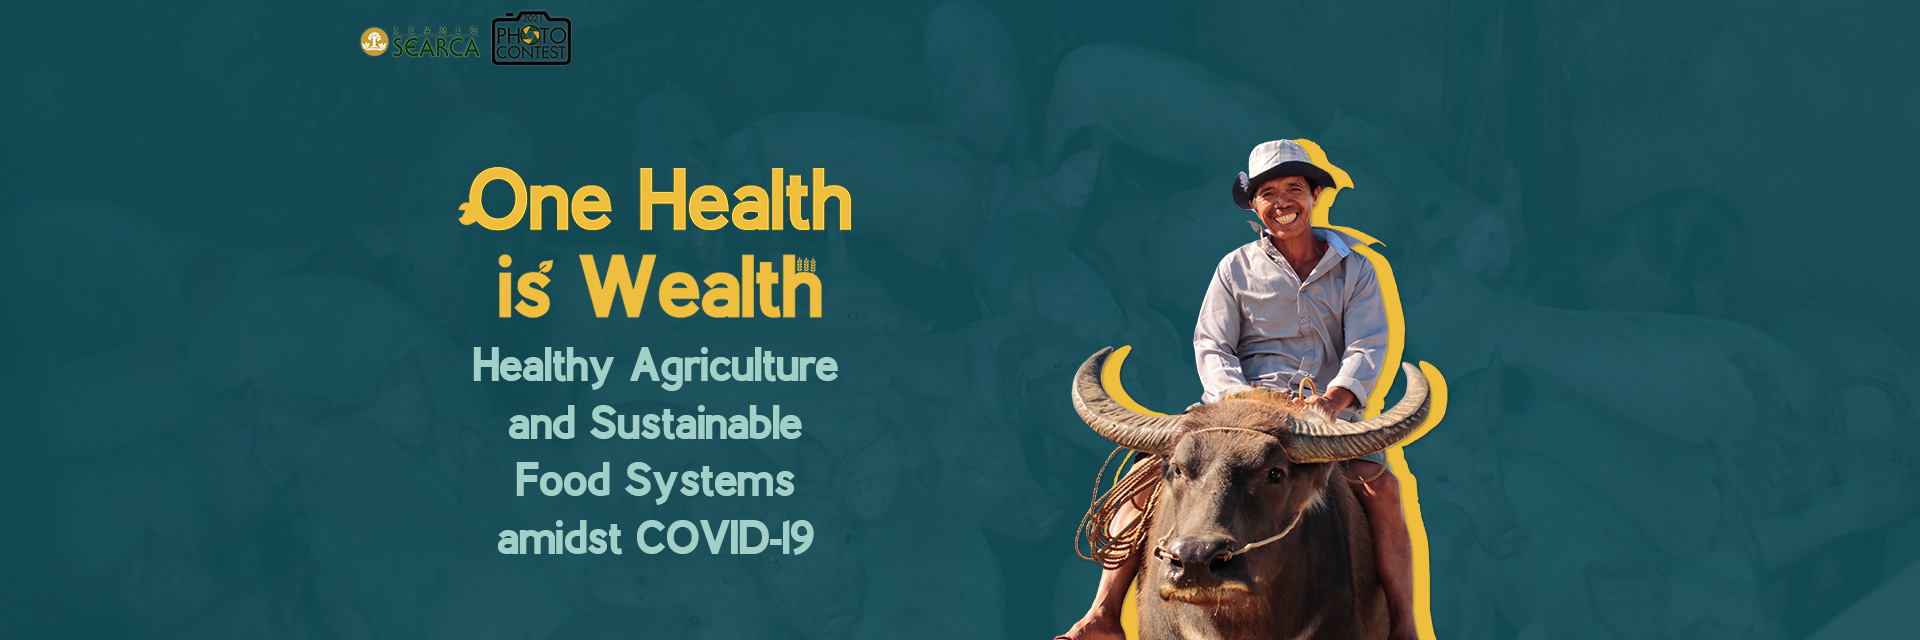 SEARCA Photo Contest 2021 - One Health is Wealth:  Healthy Agriculture and Sustainable Food Systems amidst COVID-19